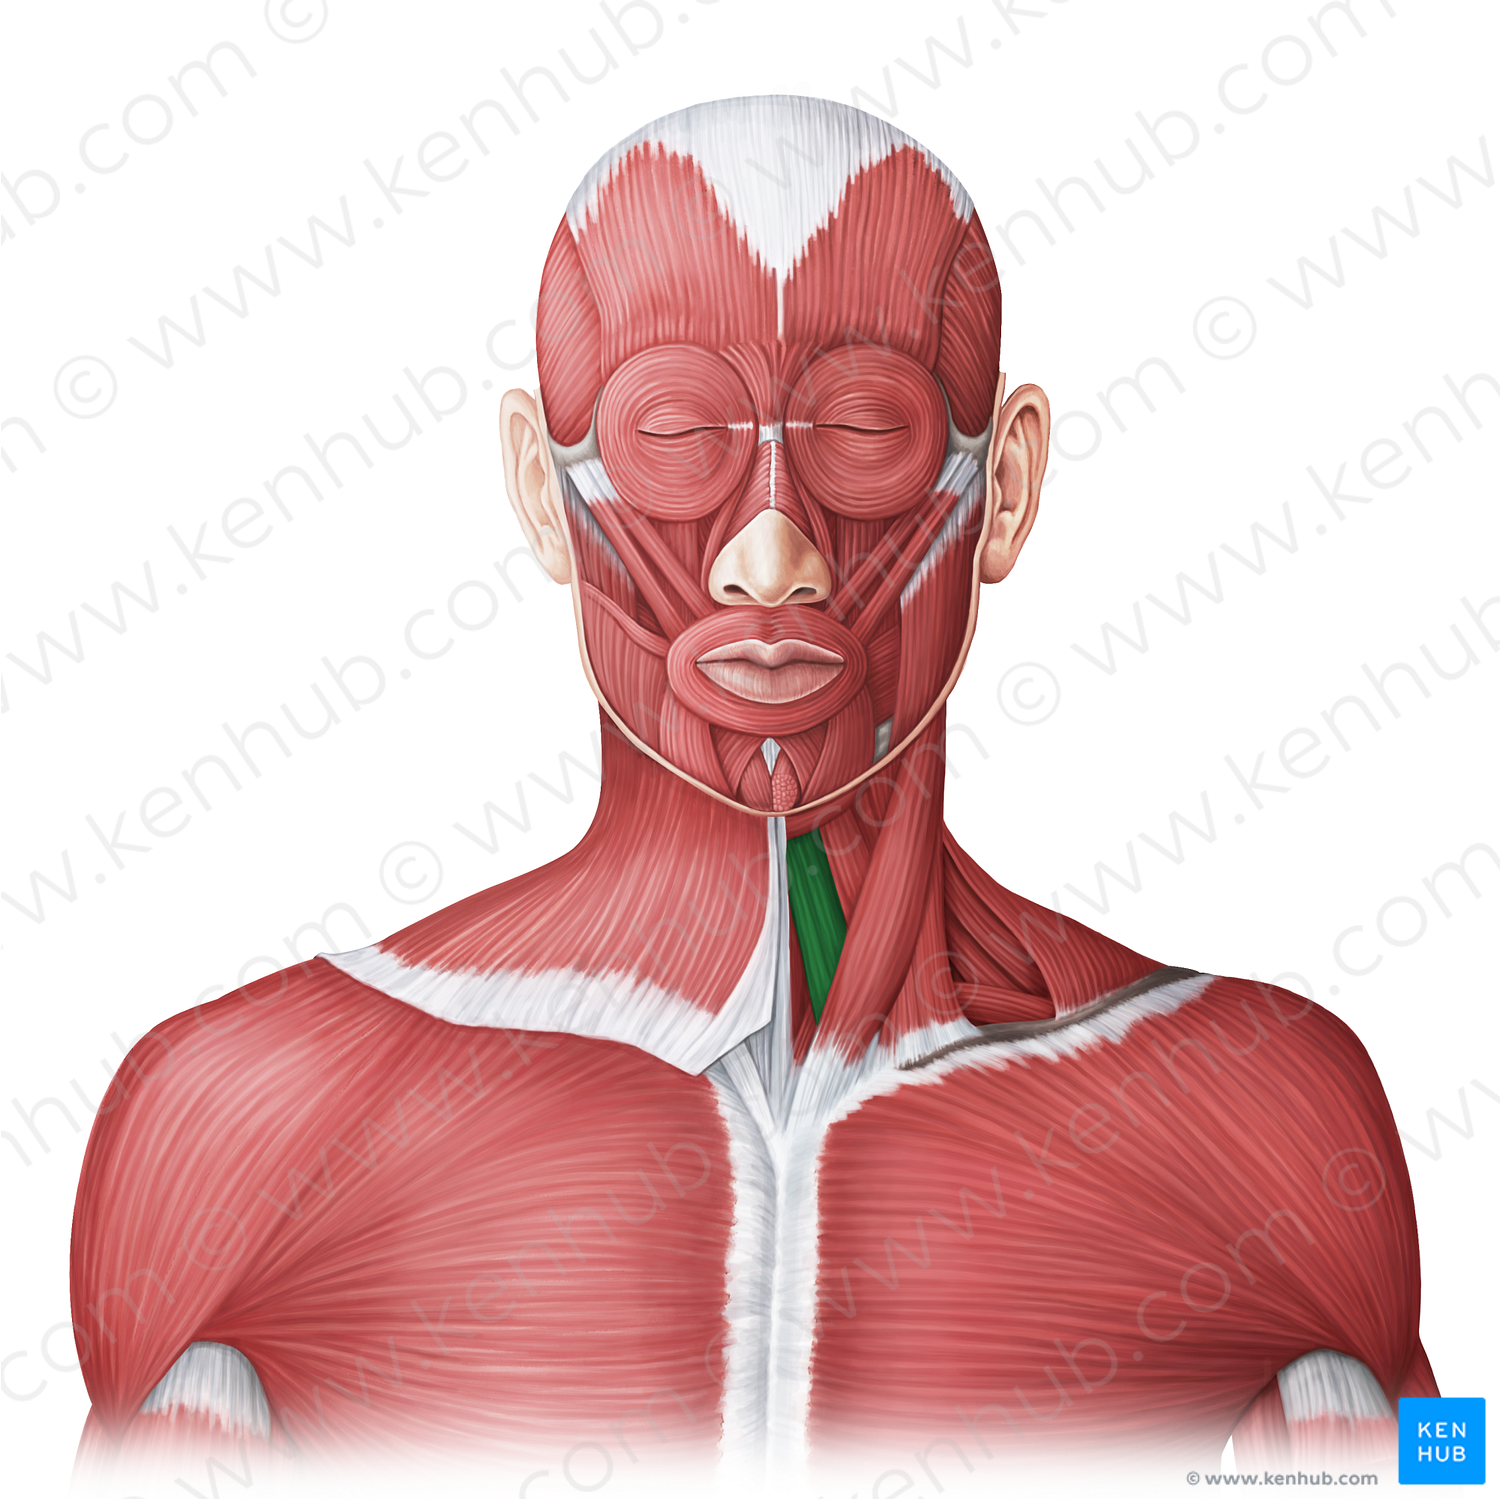 Sternohyoid muscle (#20024)